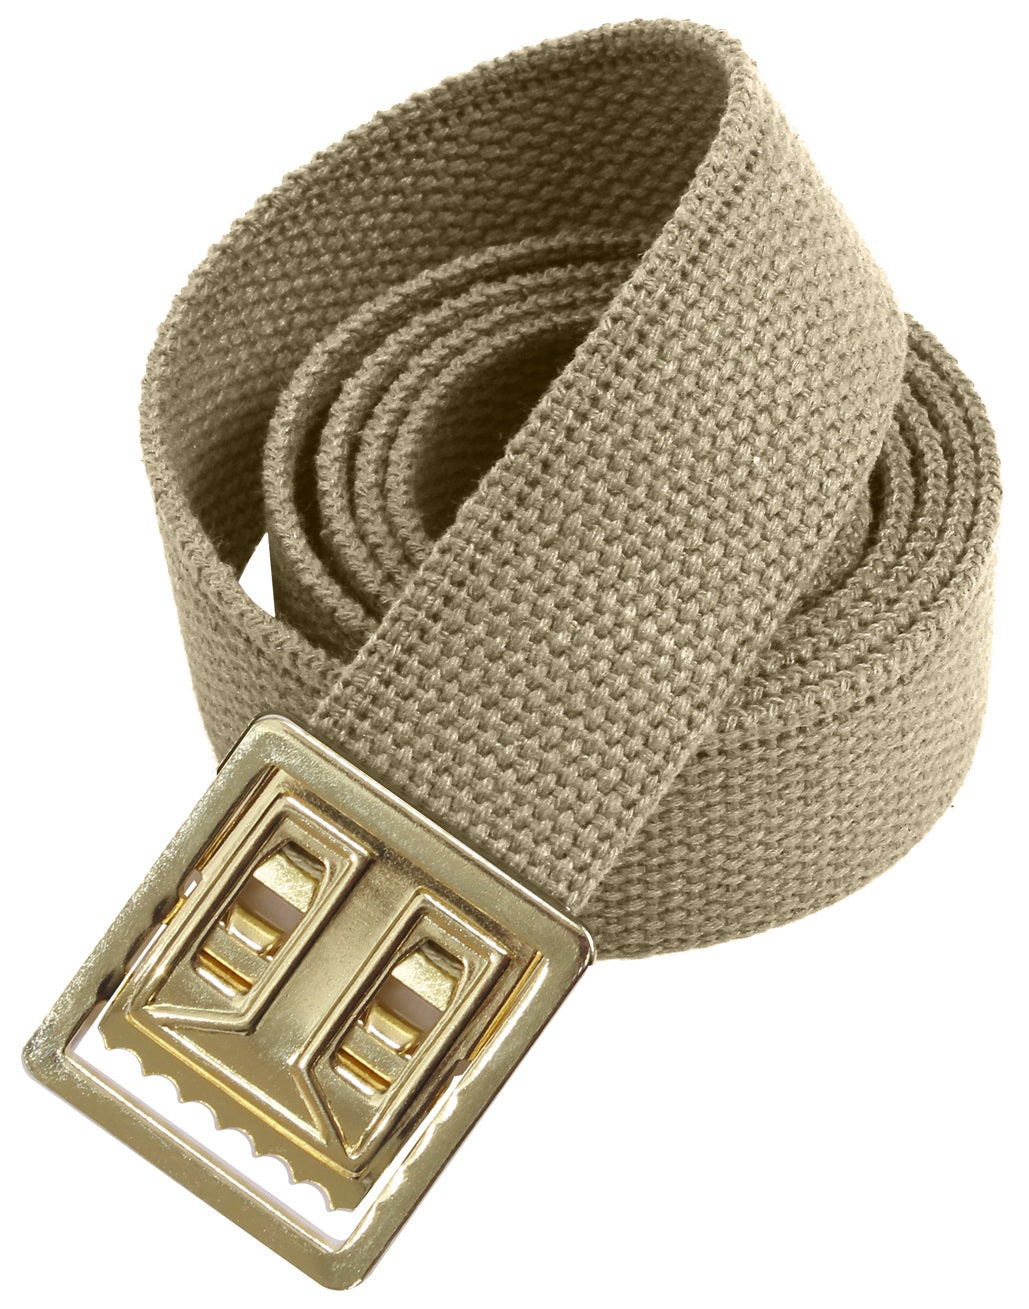 Rothco Web Belts with Open Face Buckle